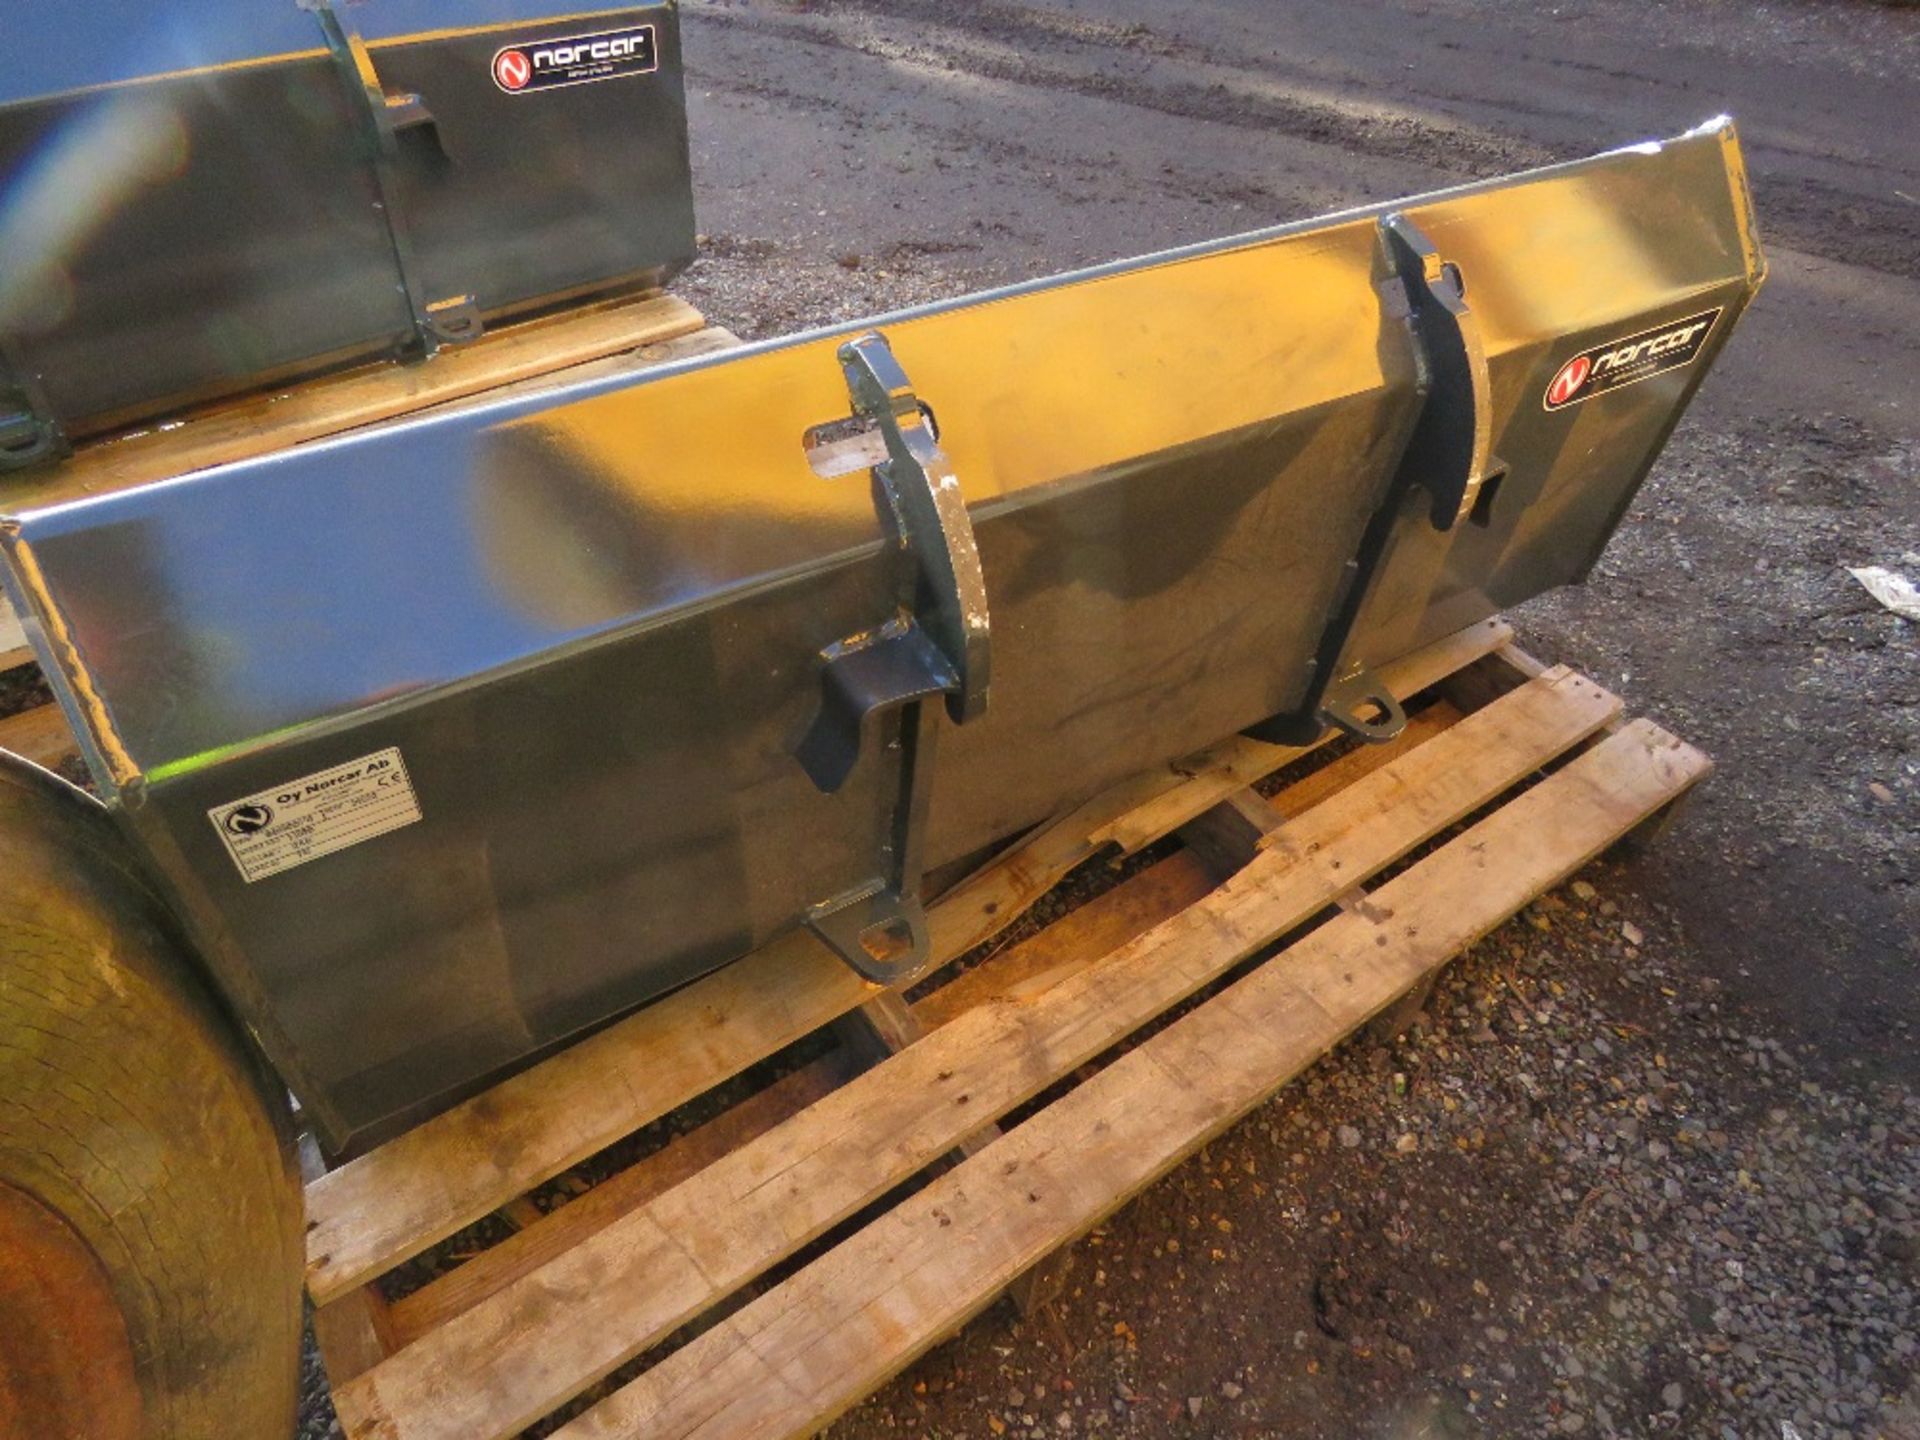 NORCAR BRANDED 1.2M WIDE LOADER BUCKET WITH BRACKETS TO FIT AVANT, MULTI ONE OR NORCAR LOADERS, 0.24 - Image 2 of 3